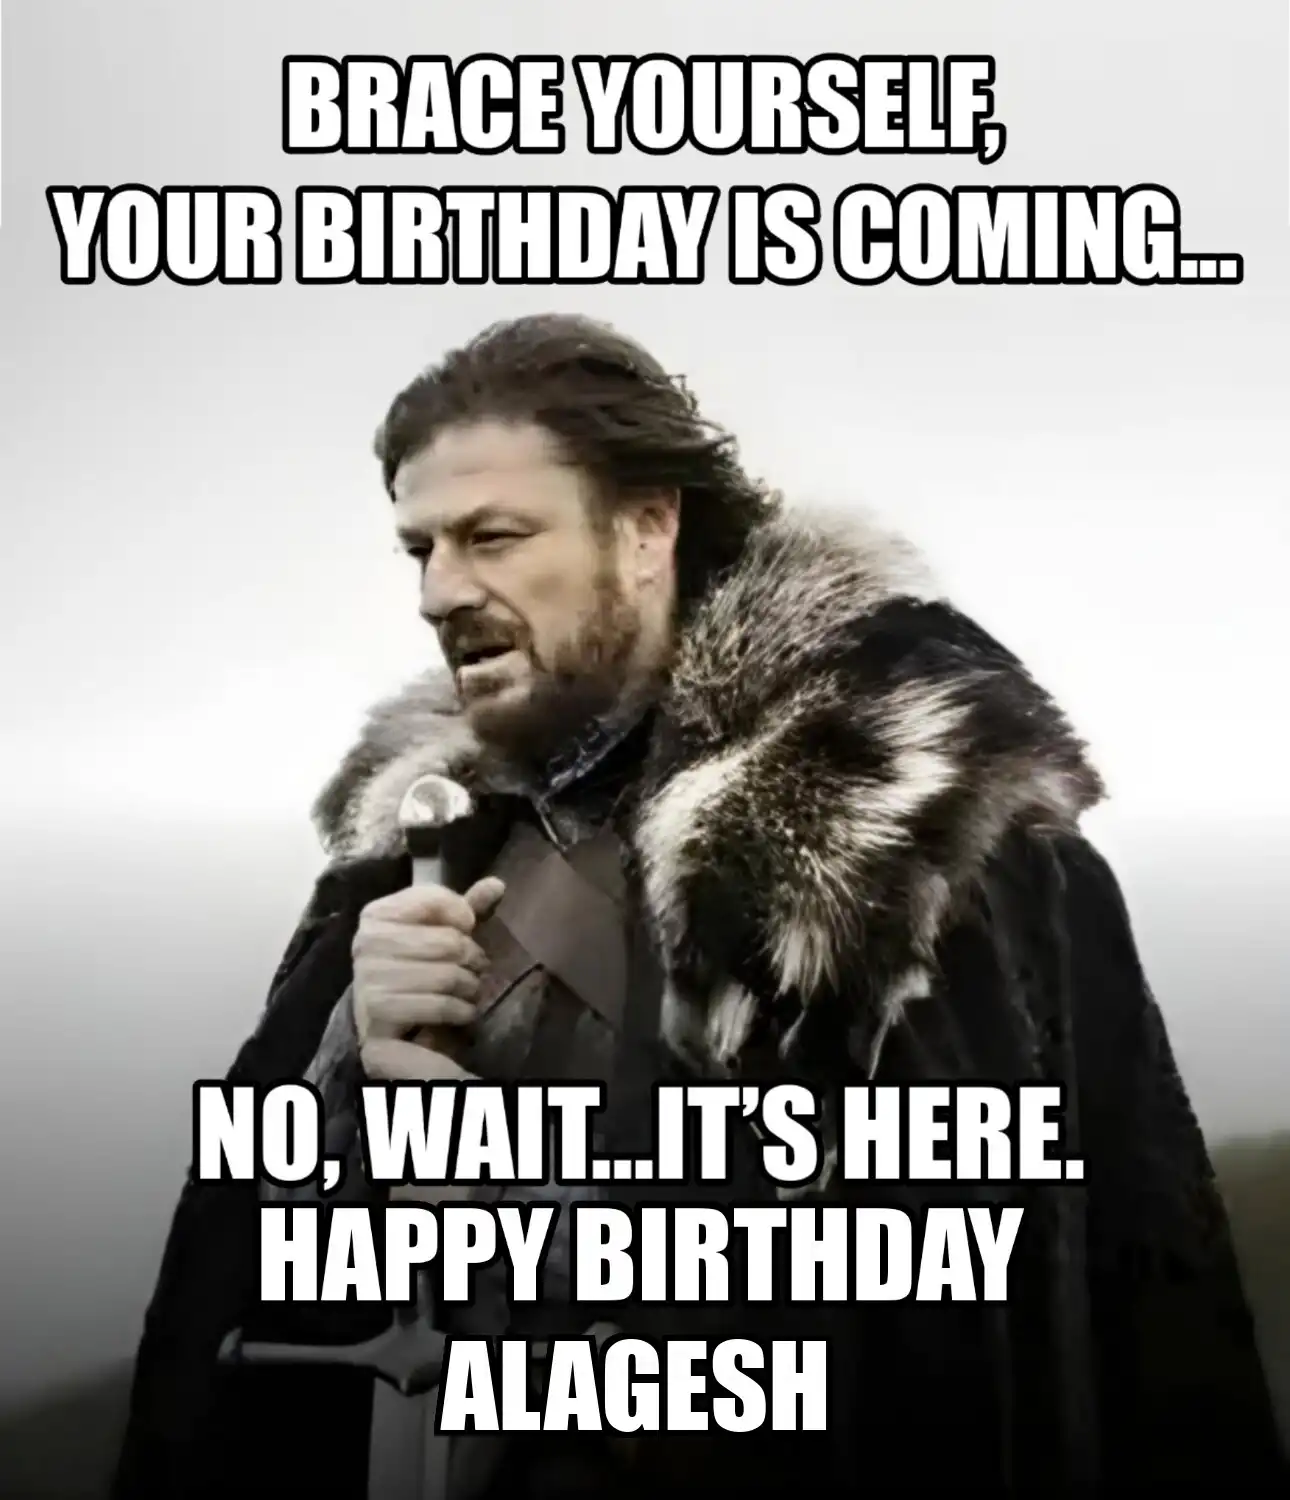 Happy Birthday Alagesh Brace Yourself Your Birthday Is Coming Meme